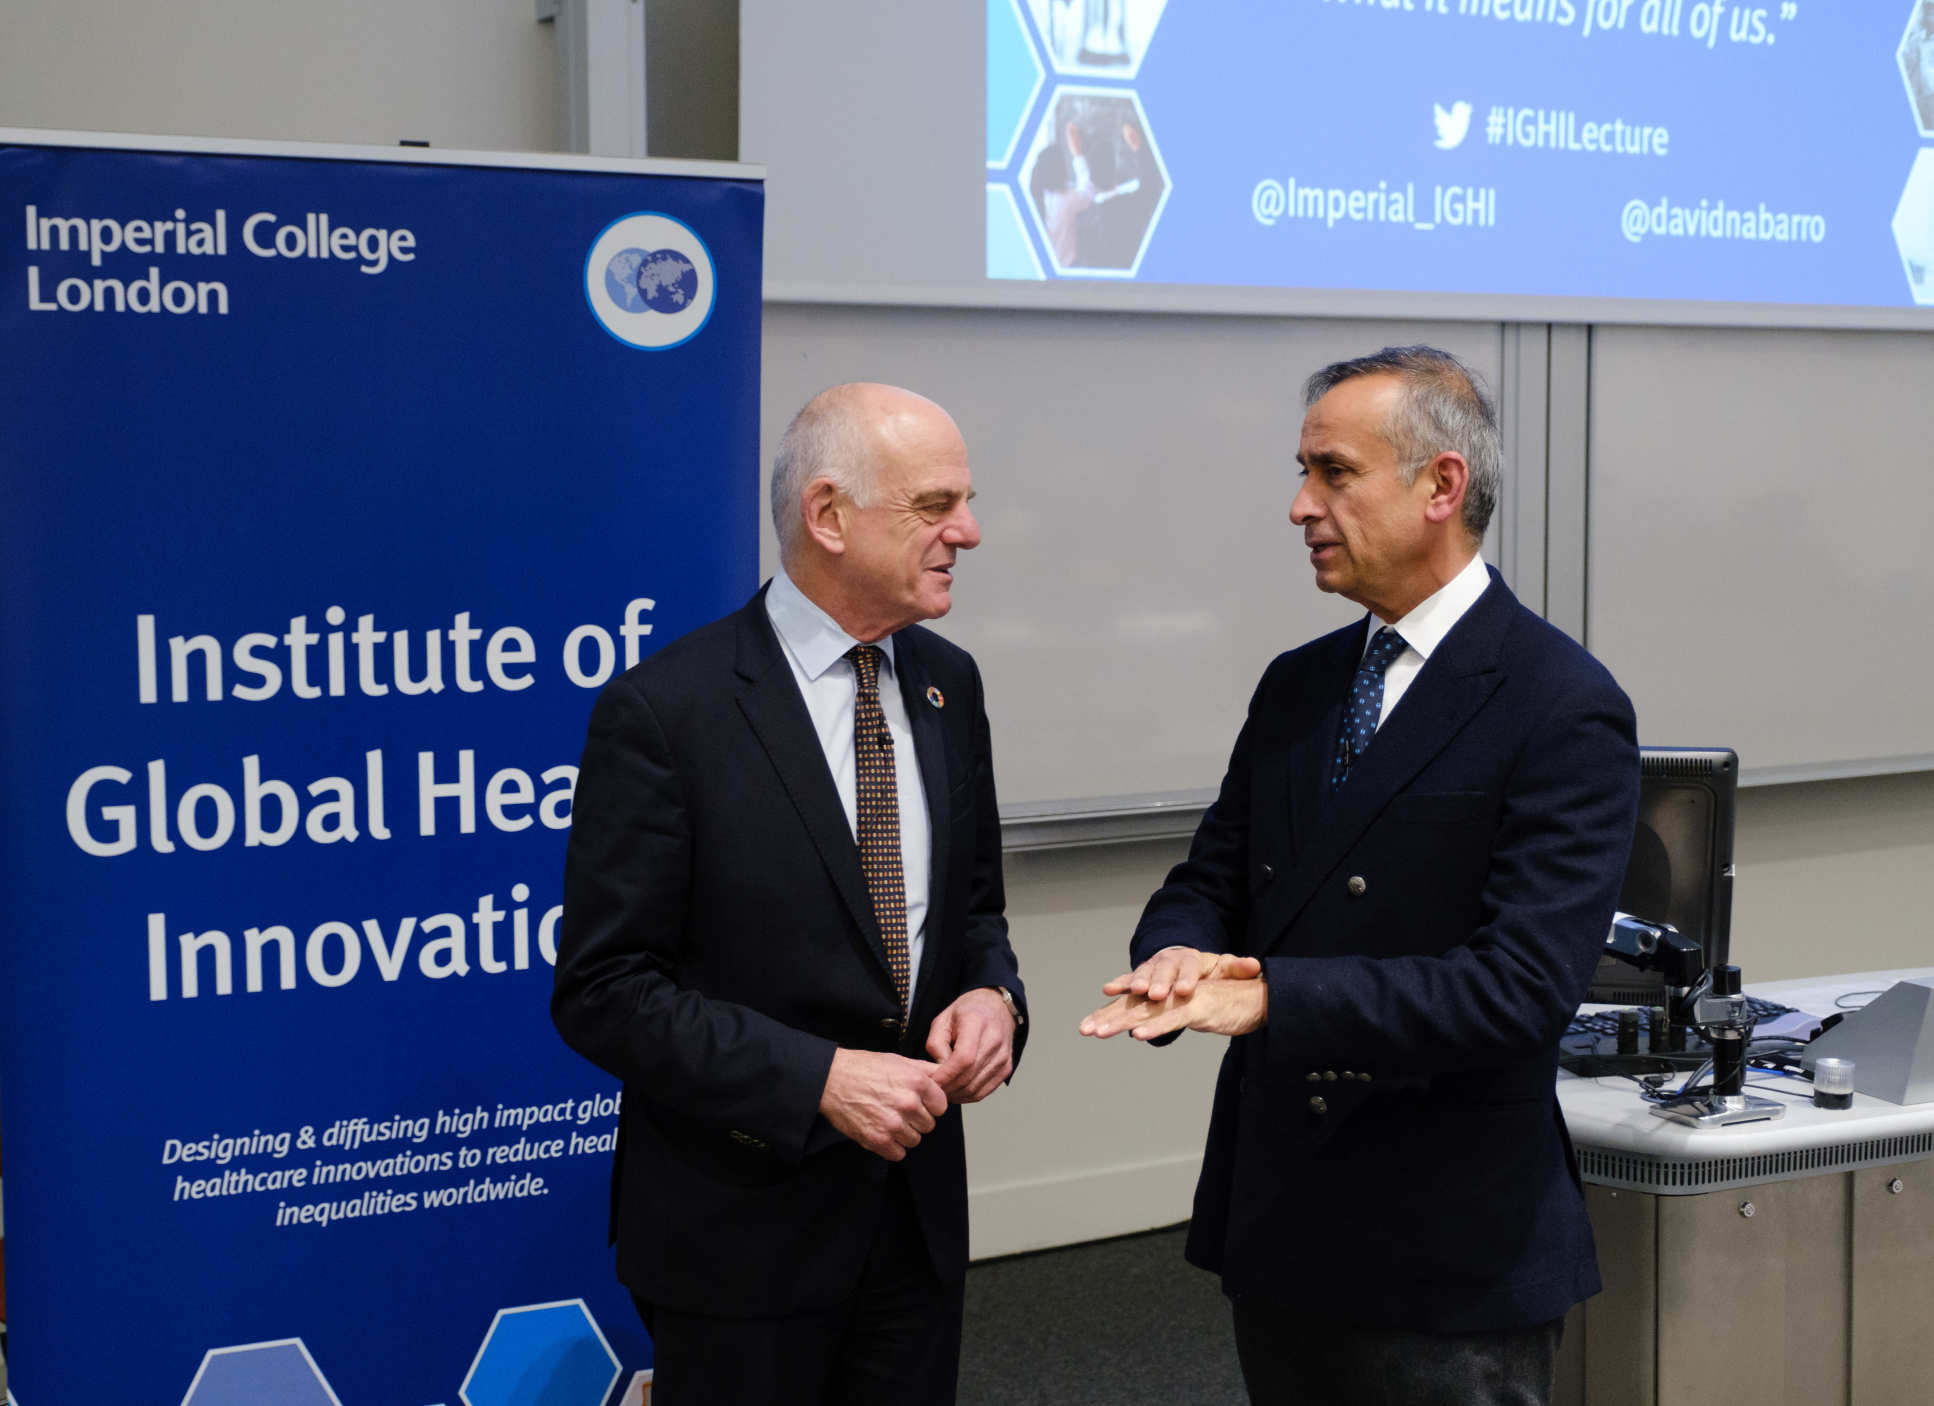 Dr Nabarro and Prof Darzi in discussion at a lecture